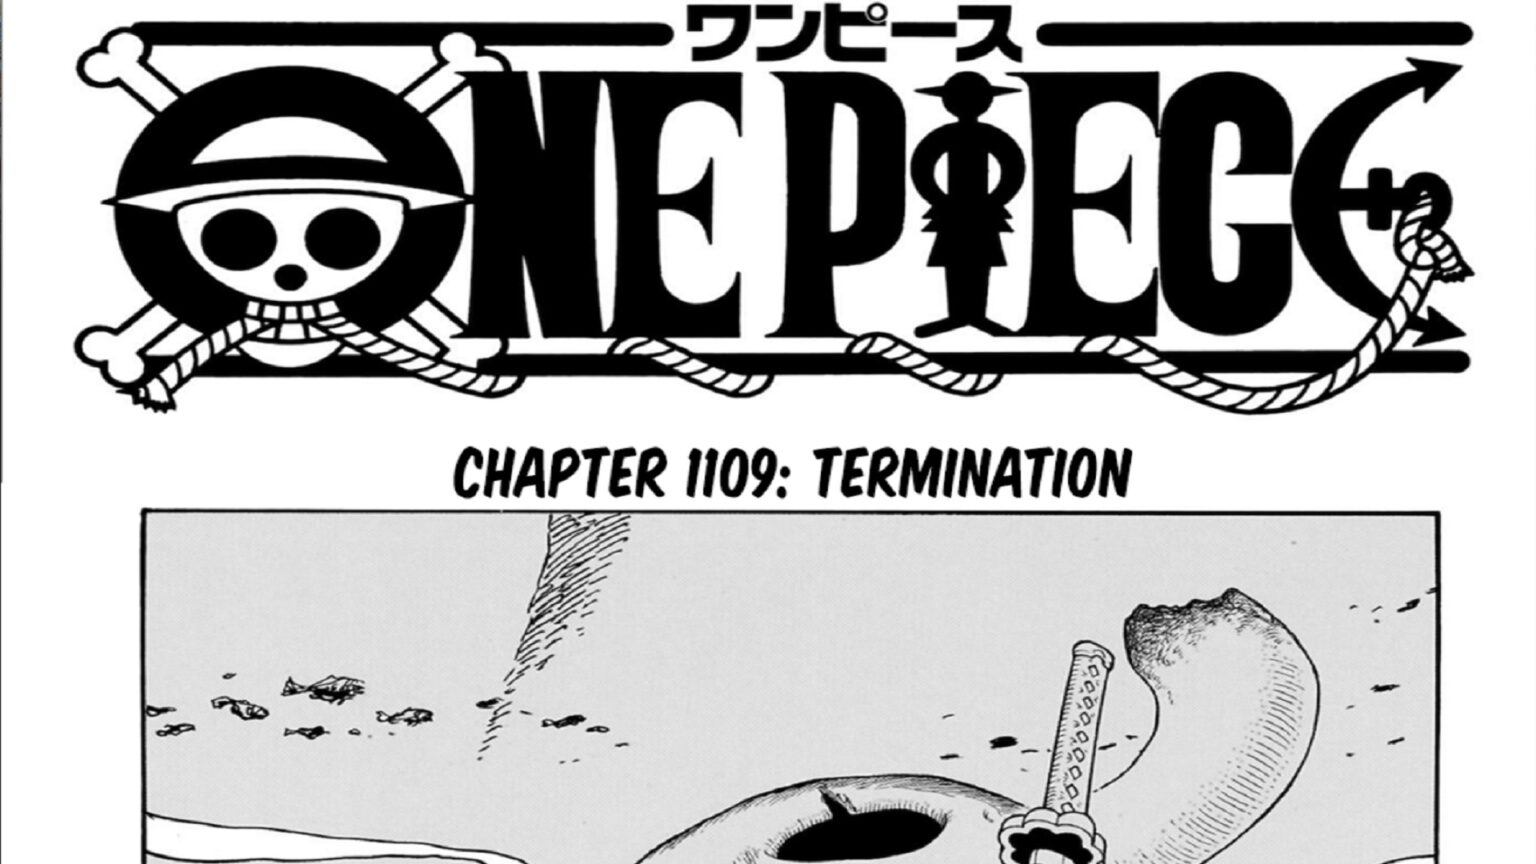 One Piece 1109 This Chapter dropped some disturbing new. Gorosei are on Egghead Island.